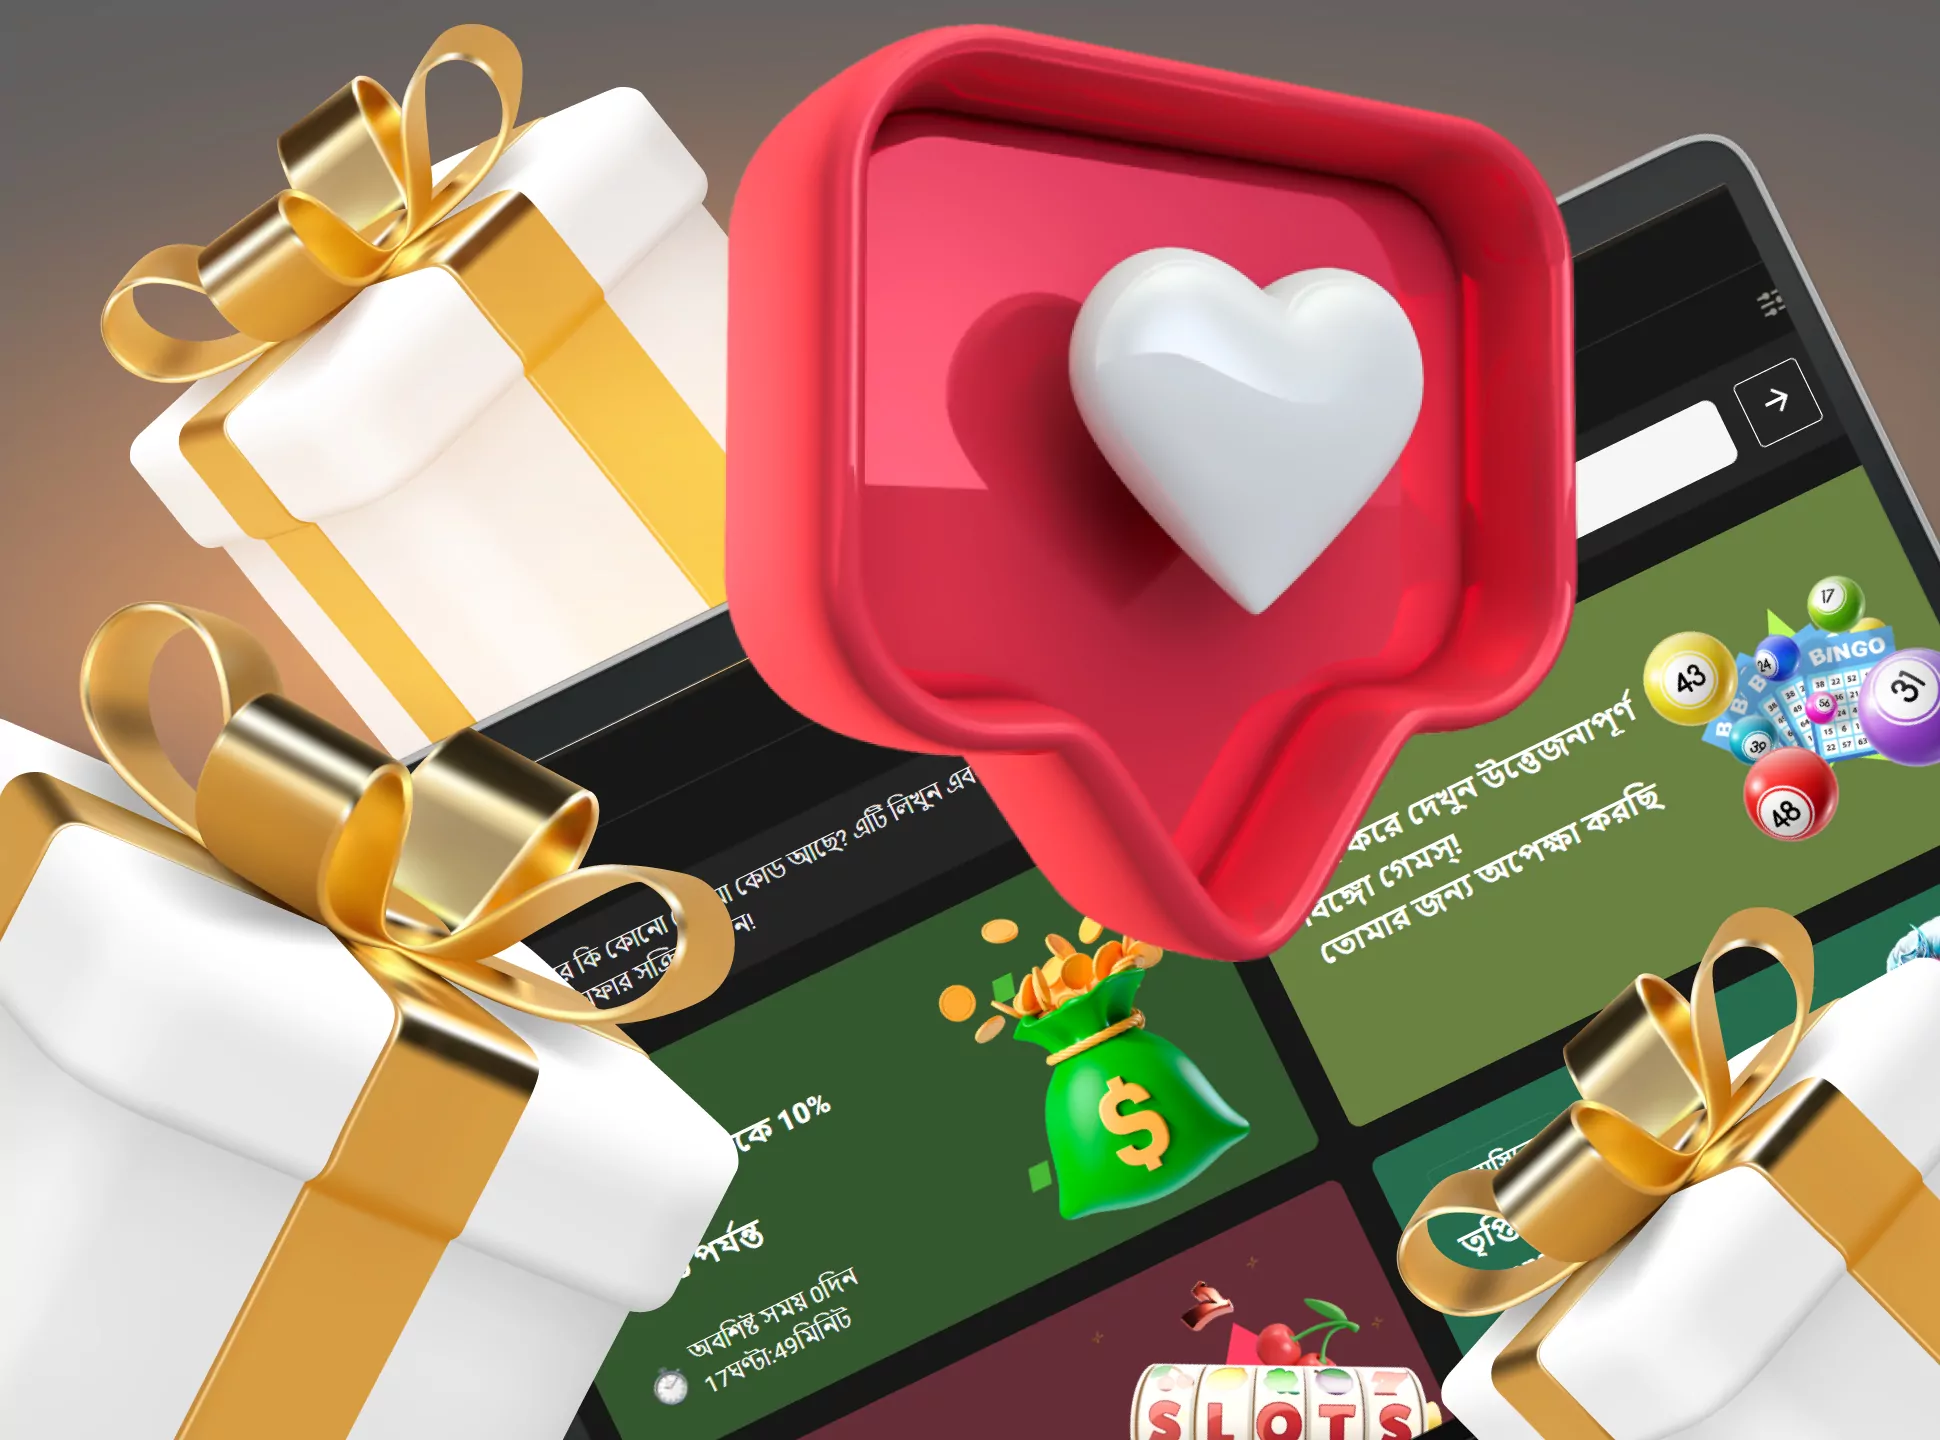 You can get real money from many mobile casino bonuses.